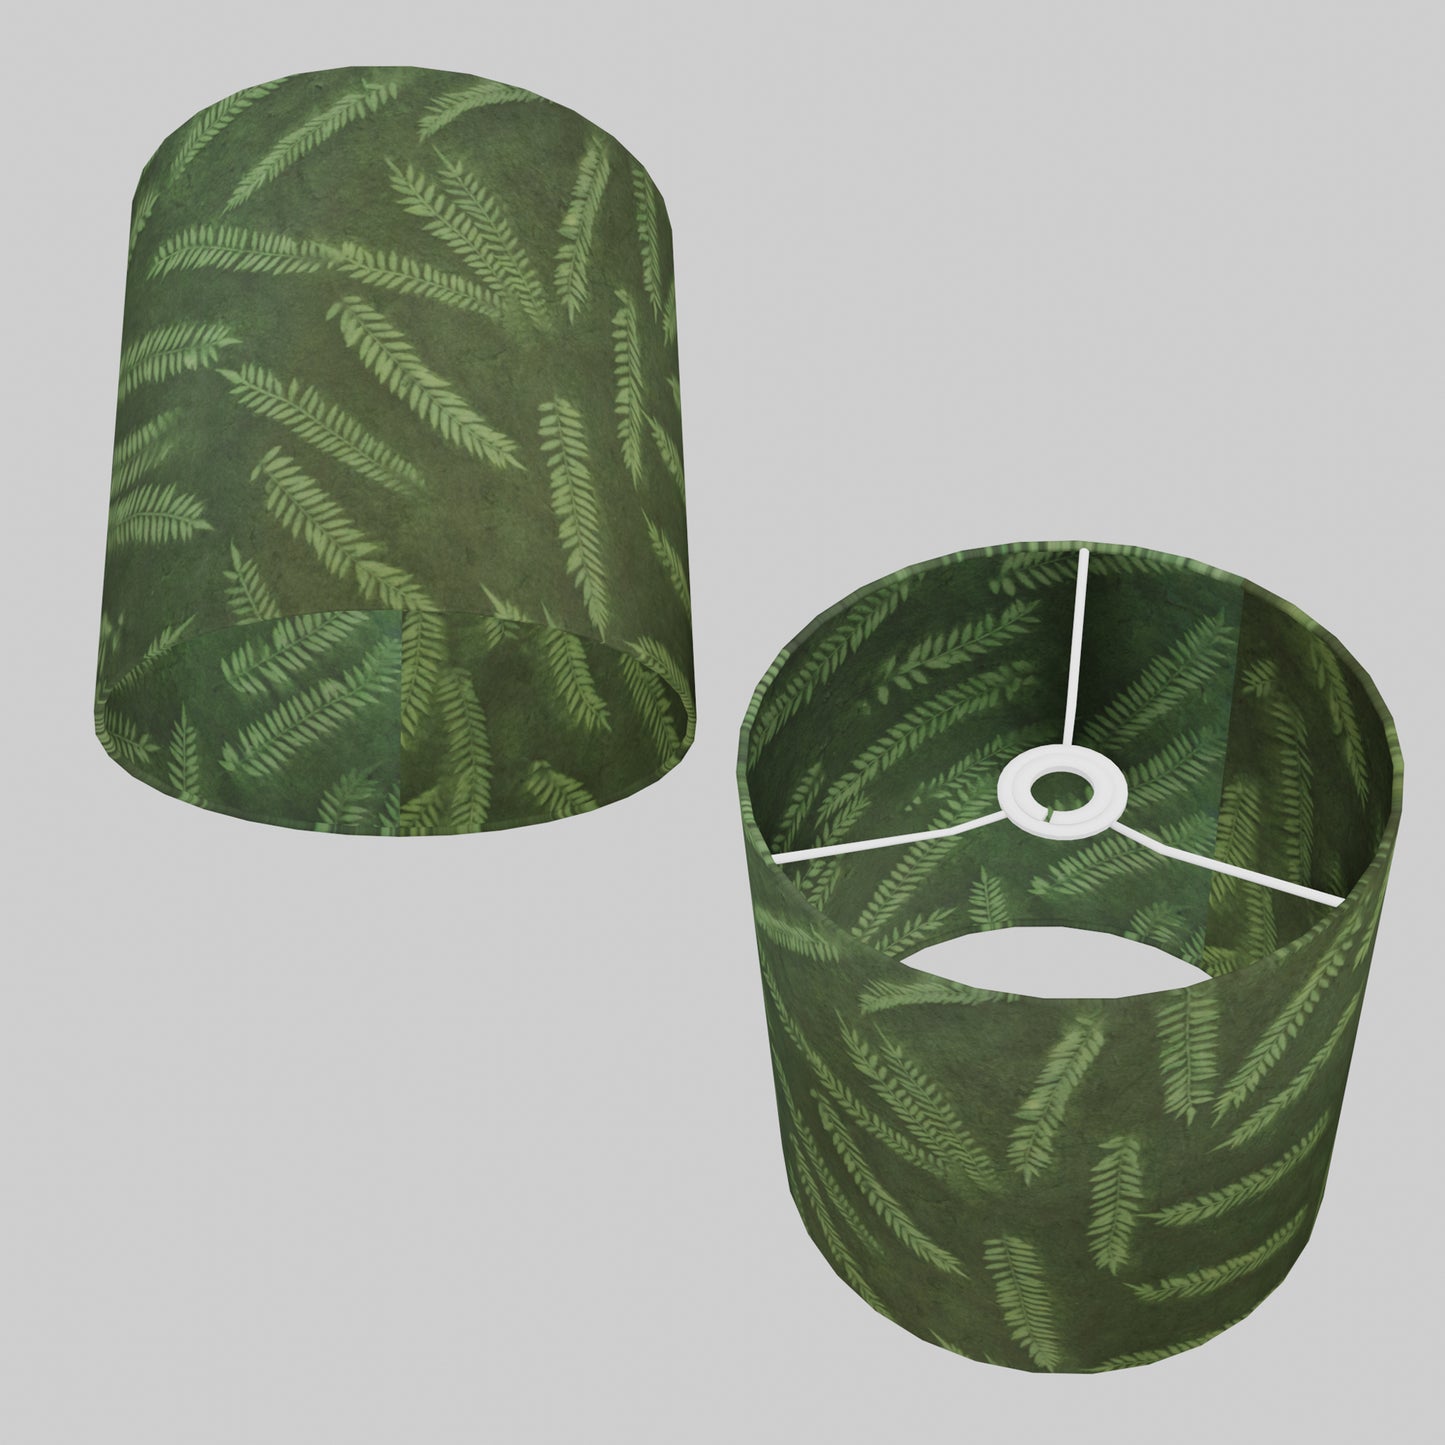 Drum Lamp Shade - P27 - Resistance Dyed Green Fern, 25cm x 25cm